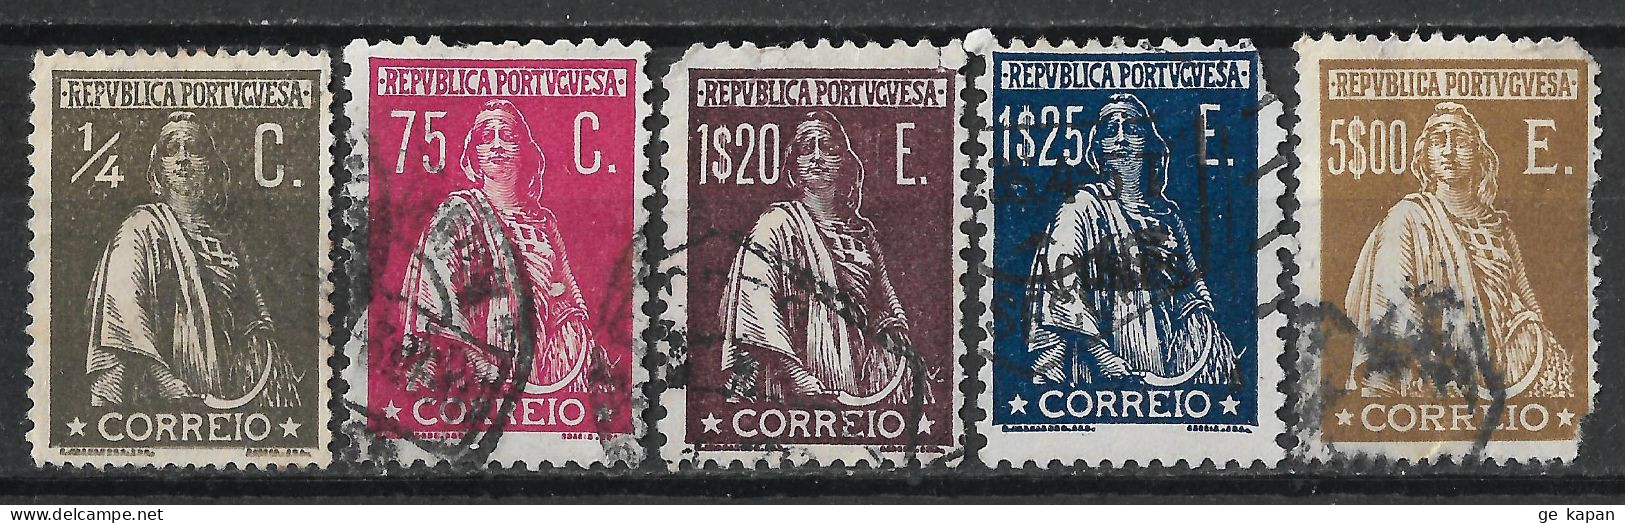 1912-1930 PORTUGAL SET OF 5 USED STAMPS (Michel # 204Ax,428,524,527,528) CV €8.30 - Used Stamps